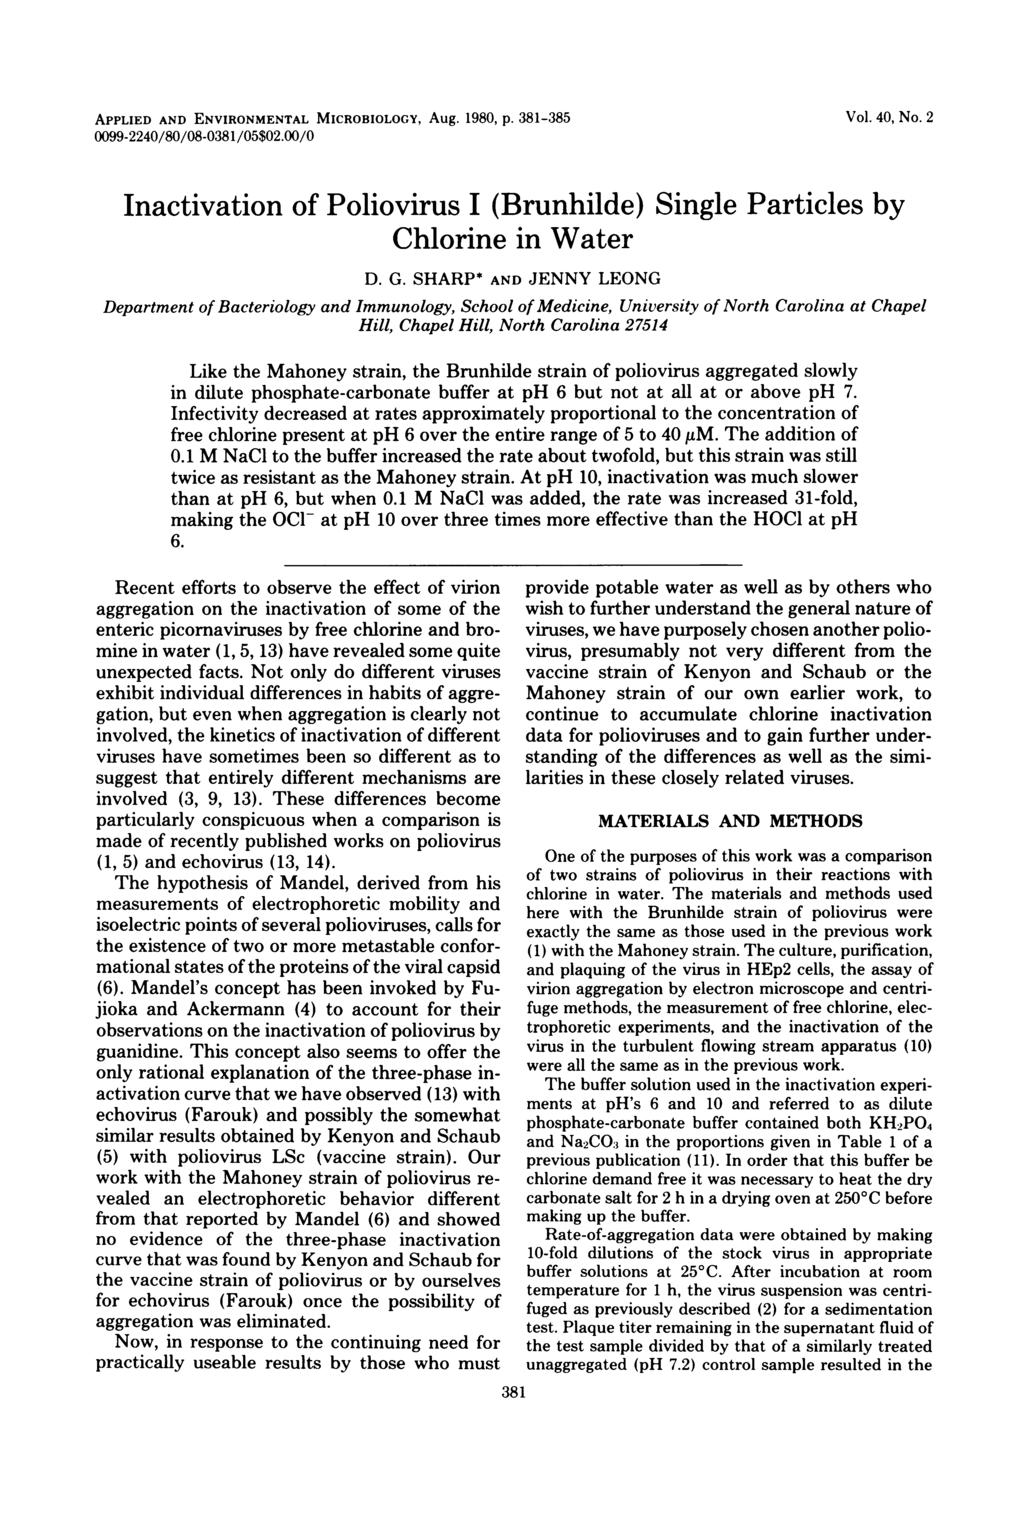 APPLIED AND ENVIRONMENTAL MICROBIOLOGY, Aug. 198, p. 381-385 99-224/8/8-381/5$2./ Vol. 4, No. 2 Inactivation of Poliovirus I (Brunhilde) Single Particles by Chlorine in Water D. G.